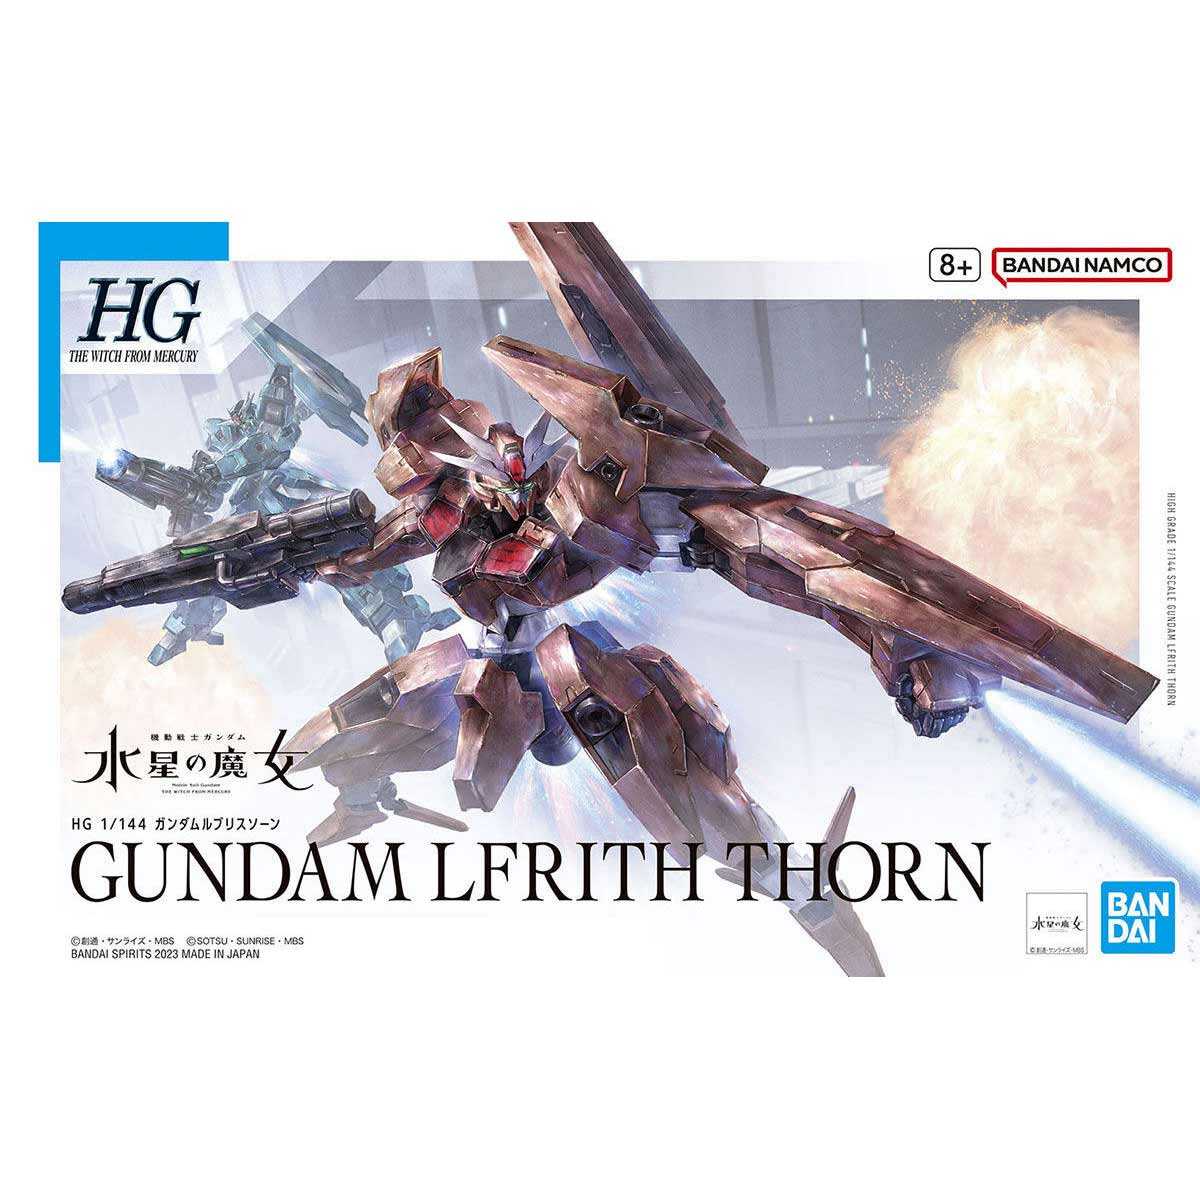 HG Lfrith Thorn 1/144 The...